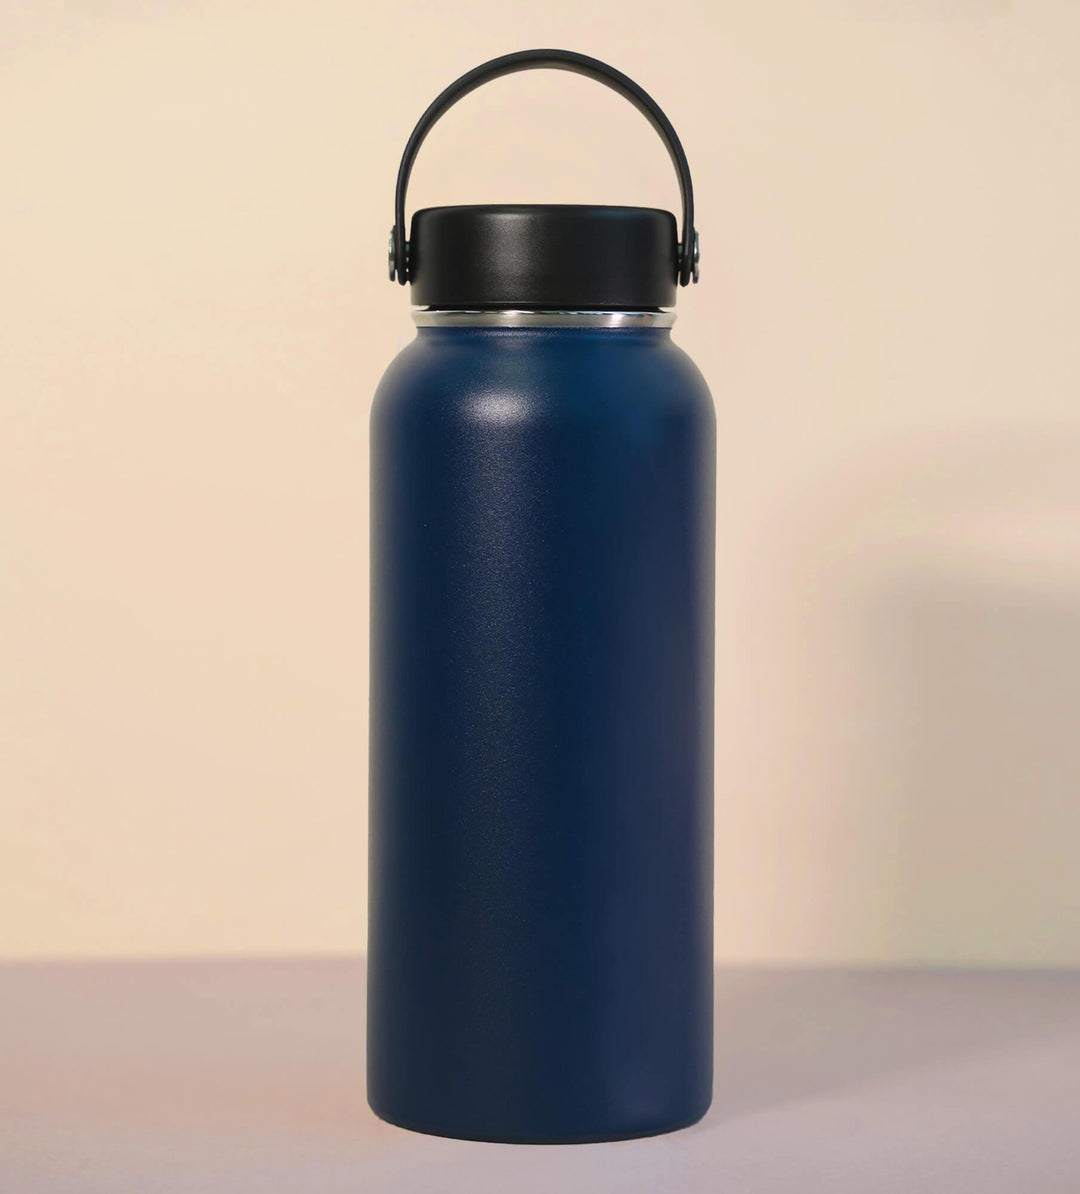 Hiro 32oz Thermal Stainless Steel Water Bottle - THEIMPRINT PTE LTD